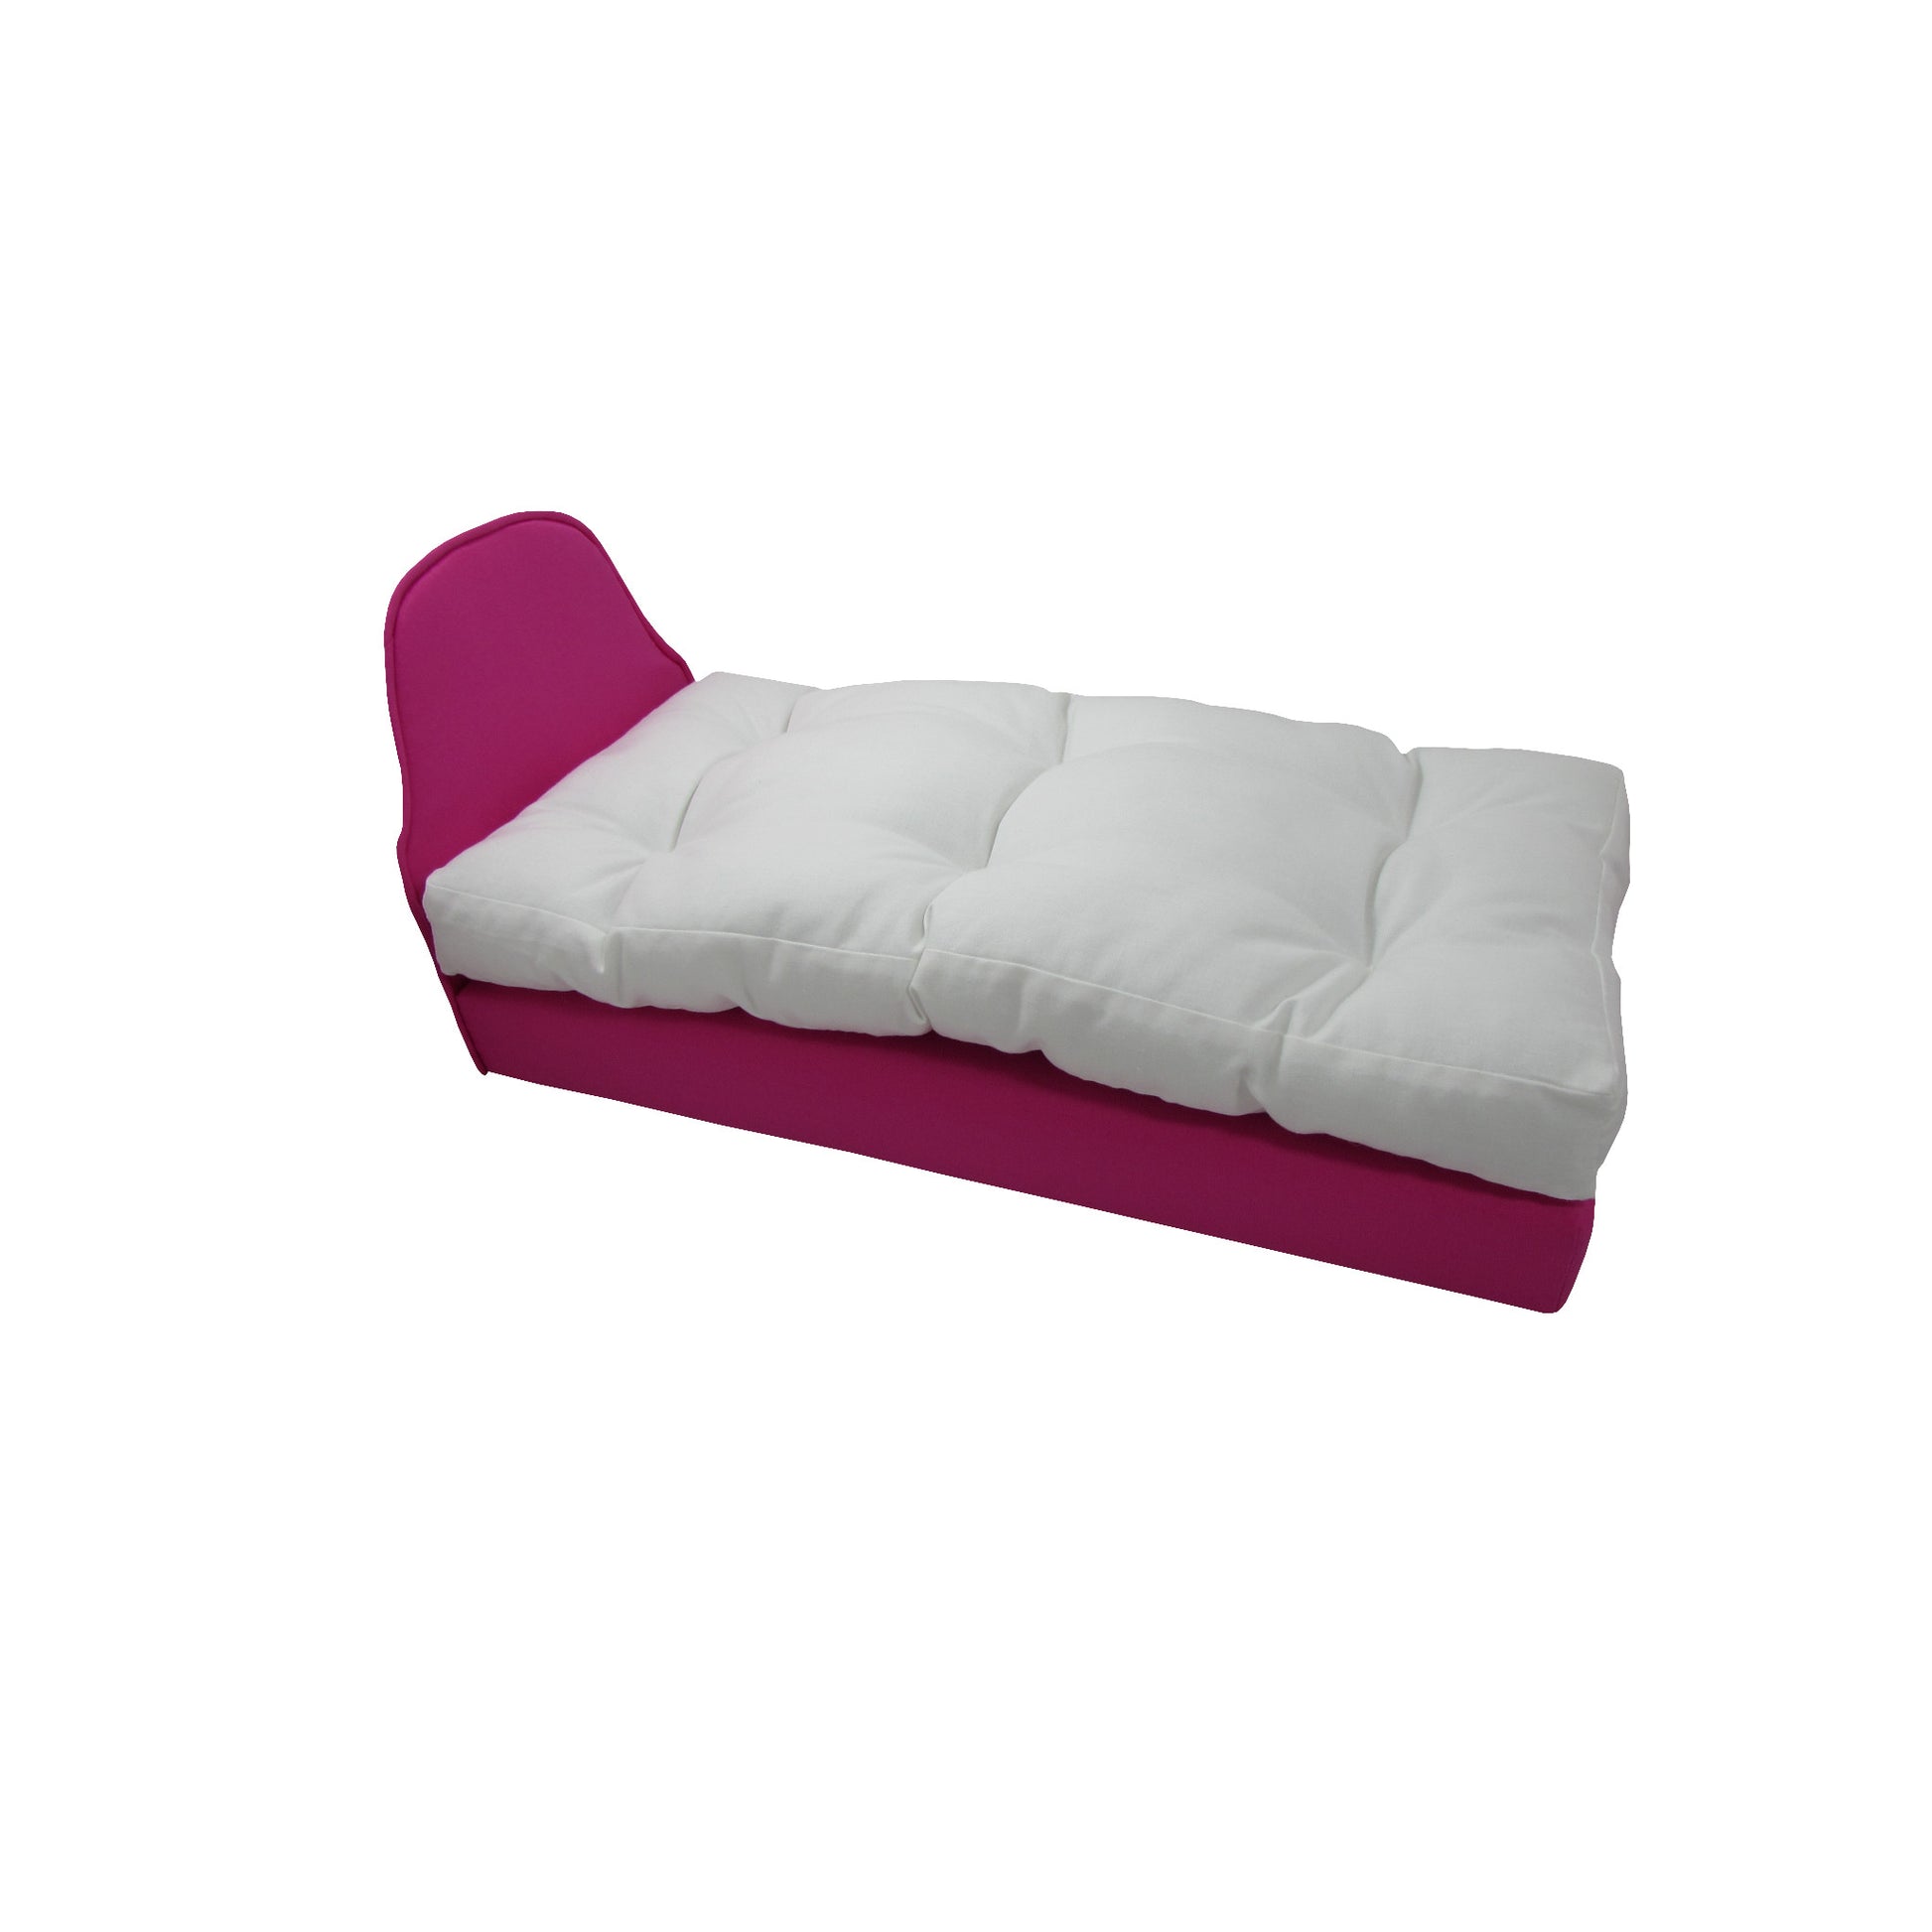 Upholstered Bright Pink Doll Bed for 14.5-inch dolls